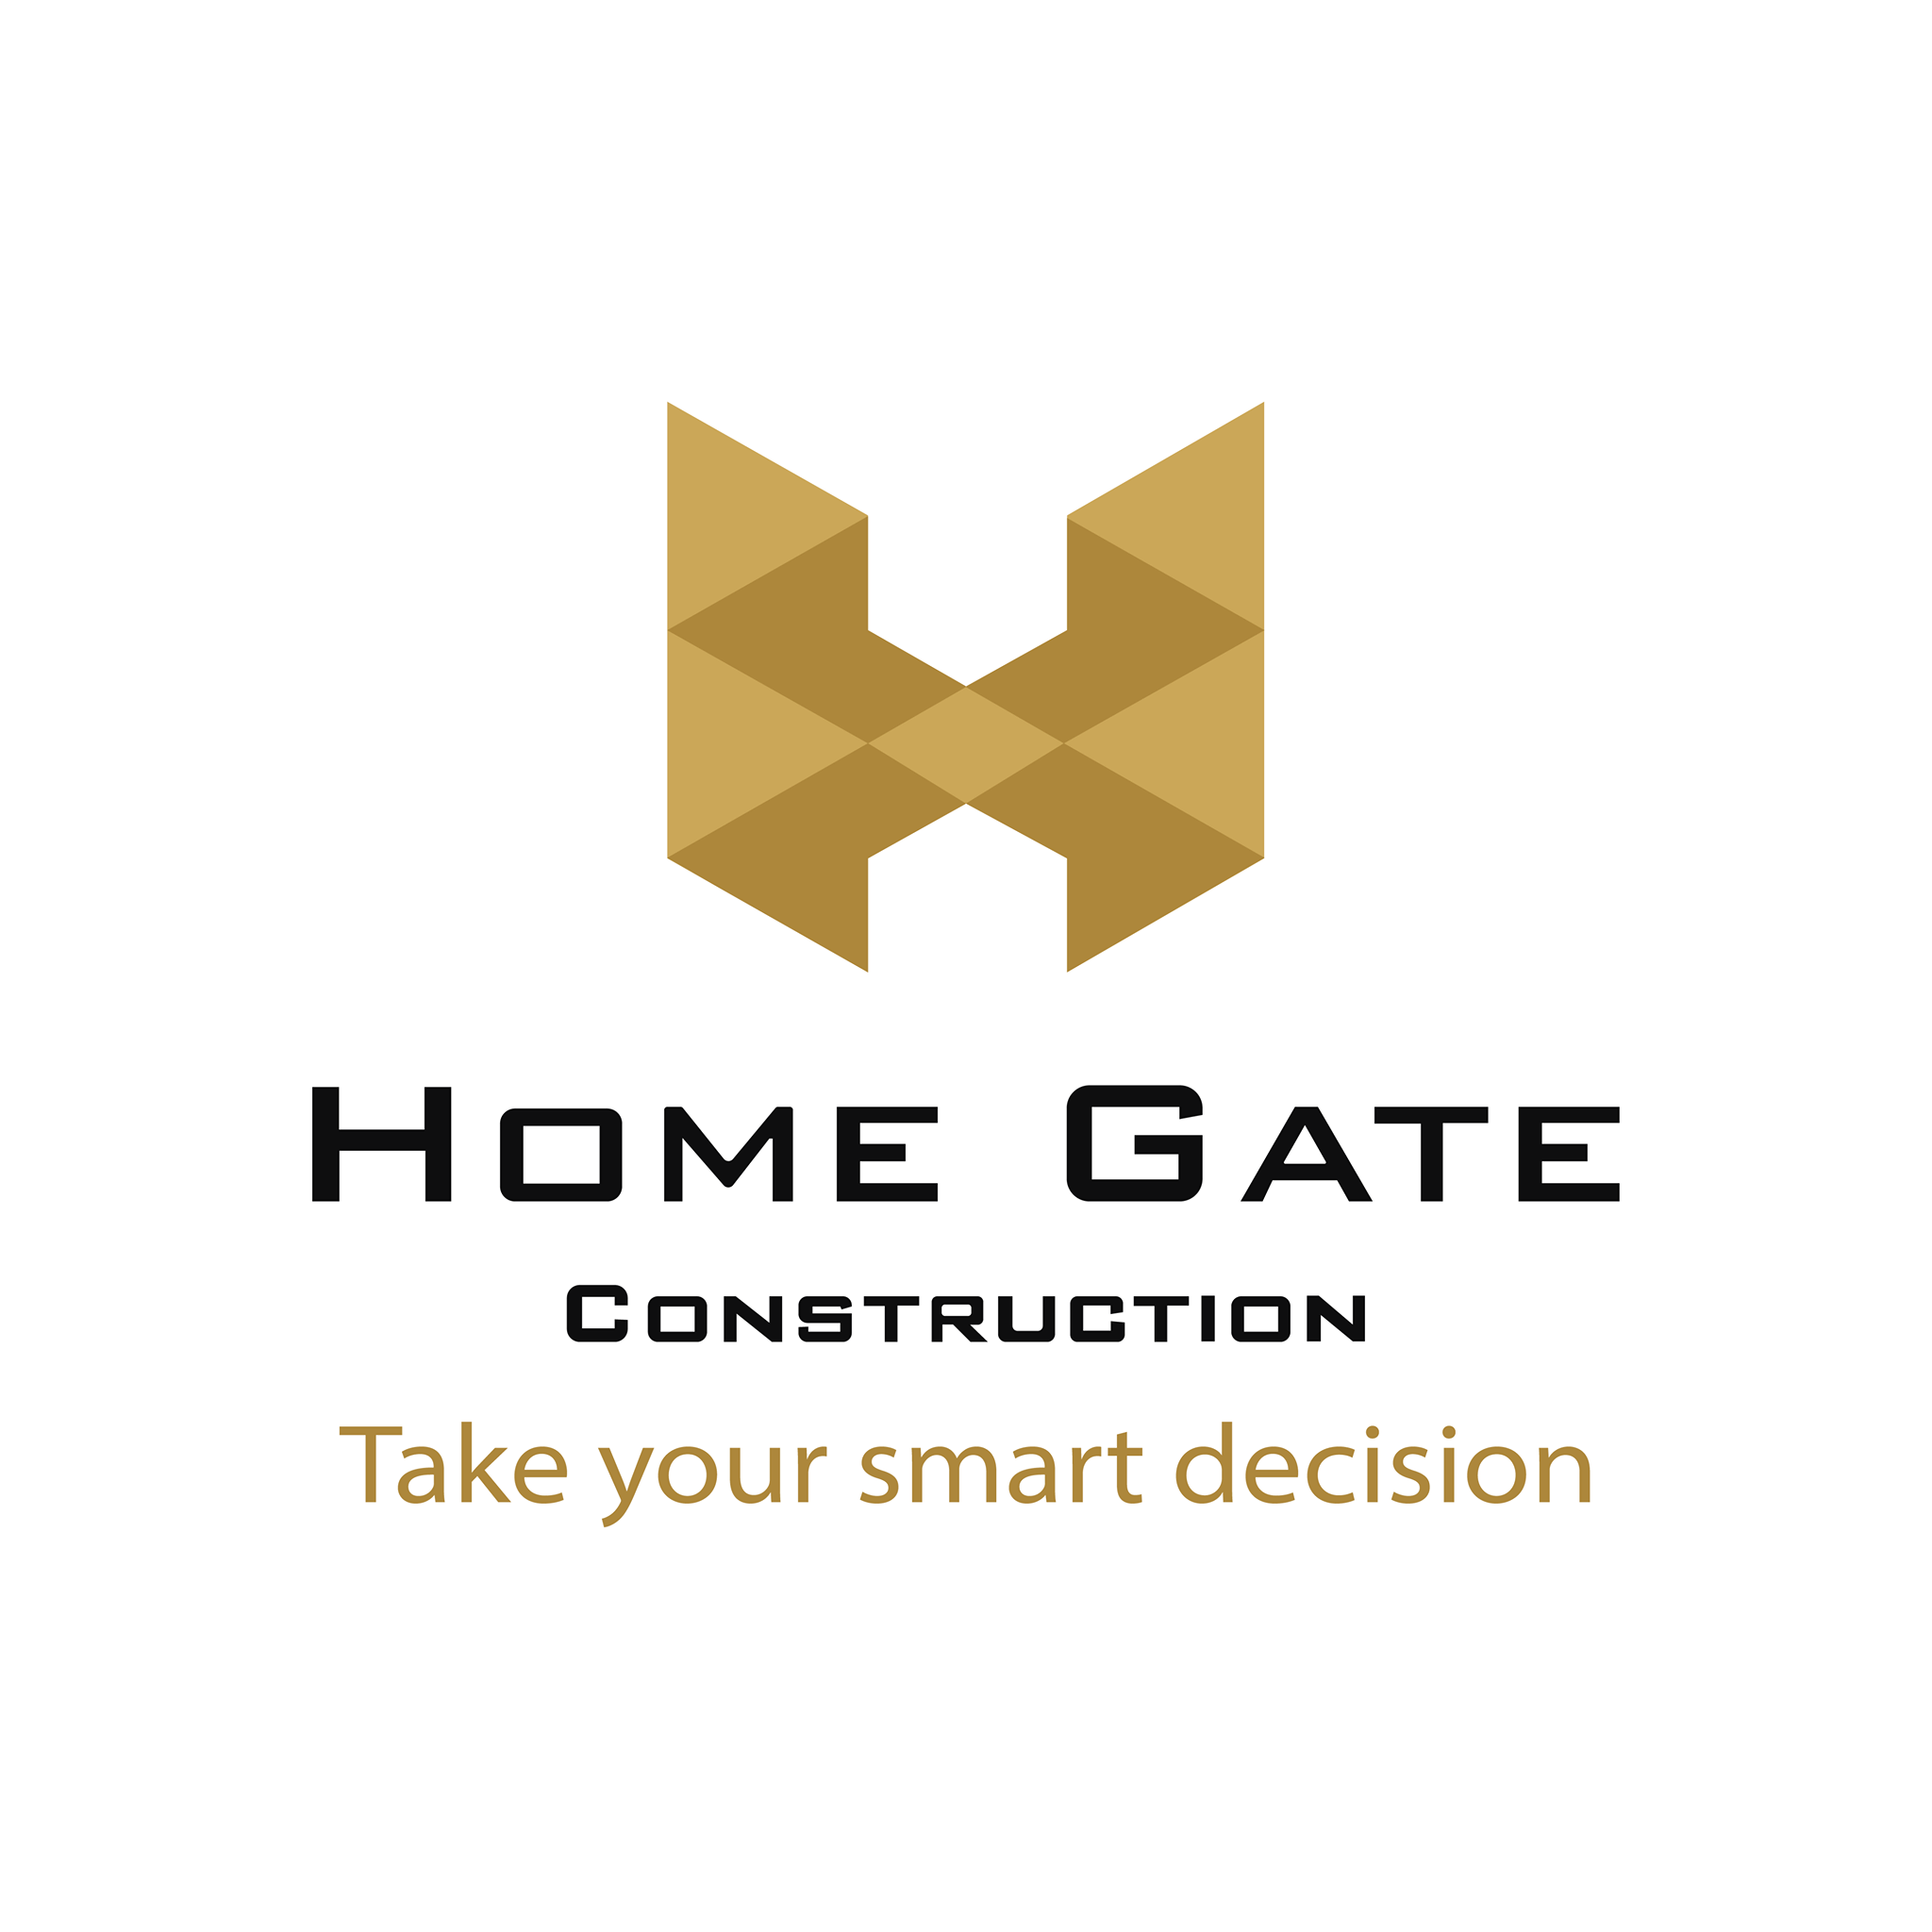 Home Gate for Construction